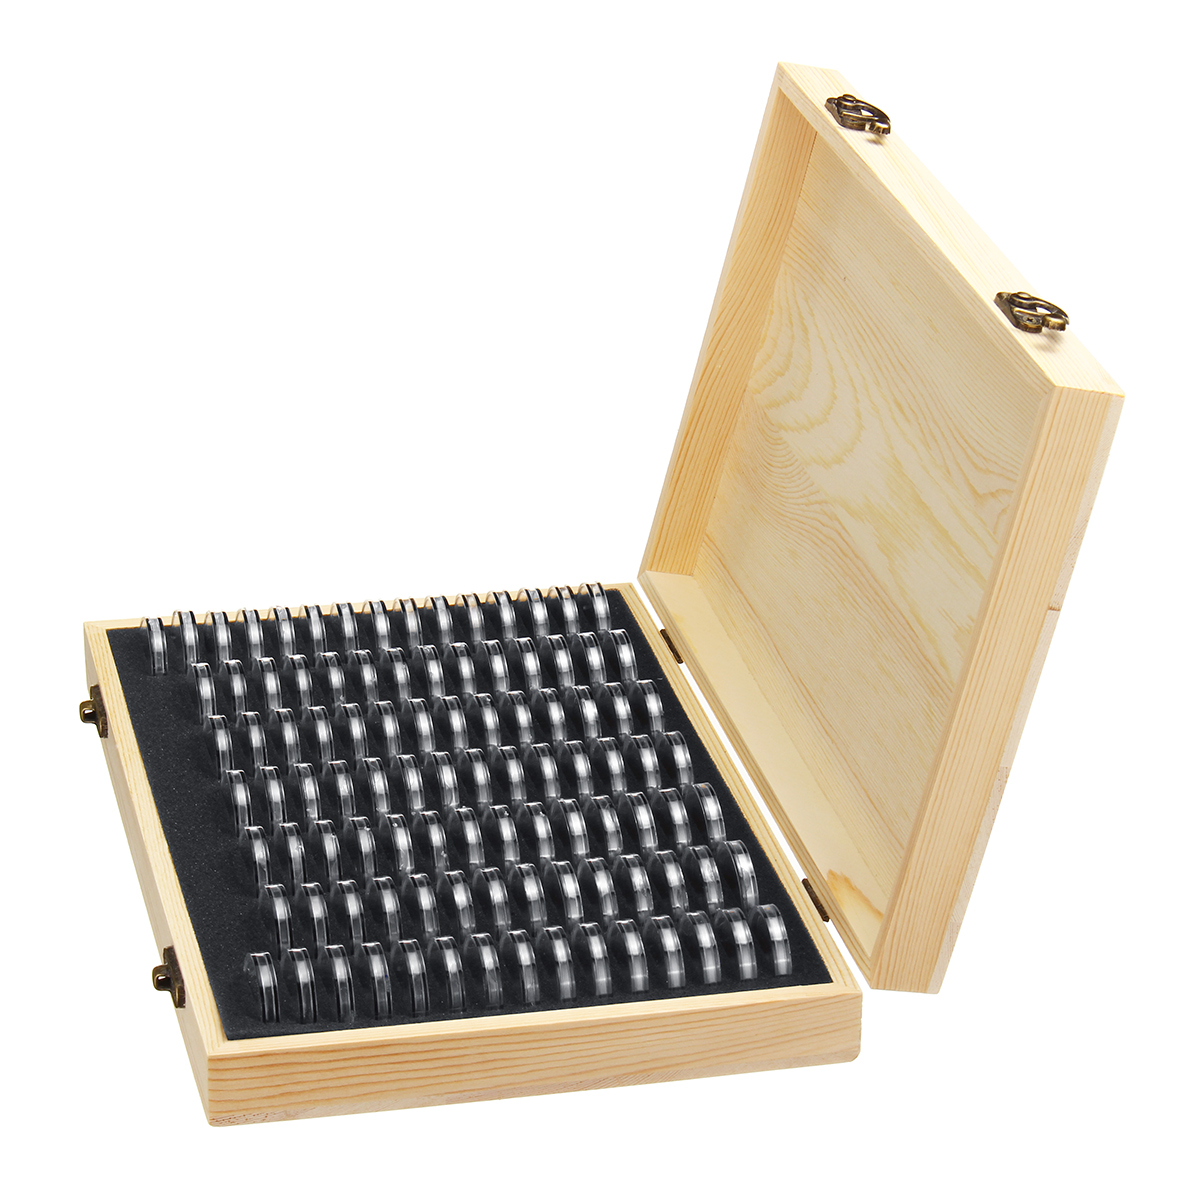 100PCS-Rugged-Wooden-Commemorative-Coin-Display-Case-Capsule-Holder-Storage-Collection-Box-1646129-10